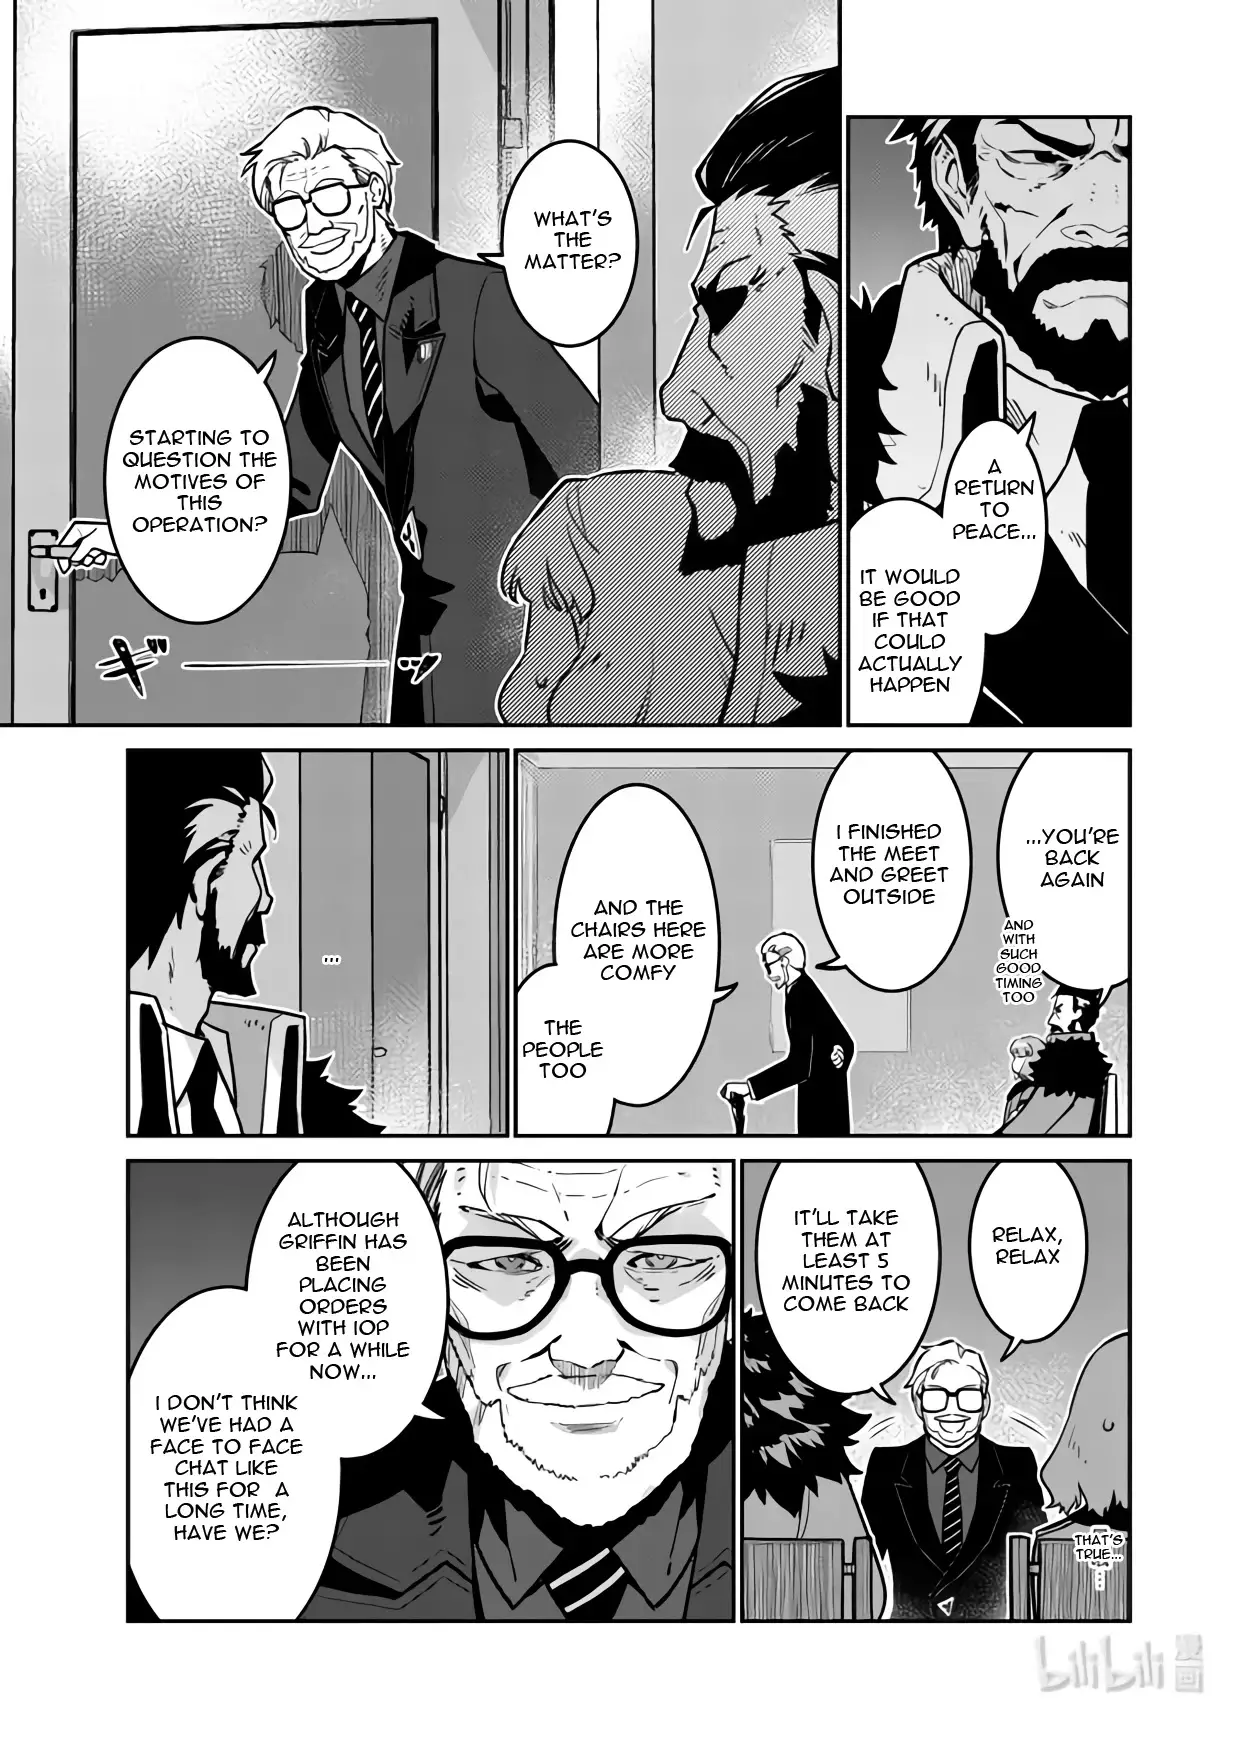 Girls' Frontline - 33 page 26-f54f5a99